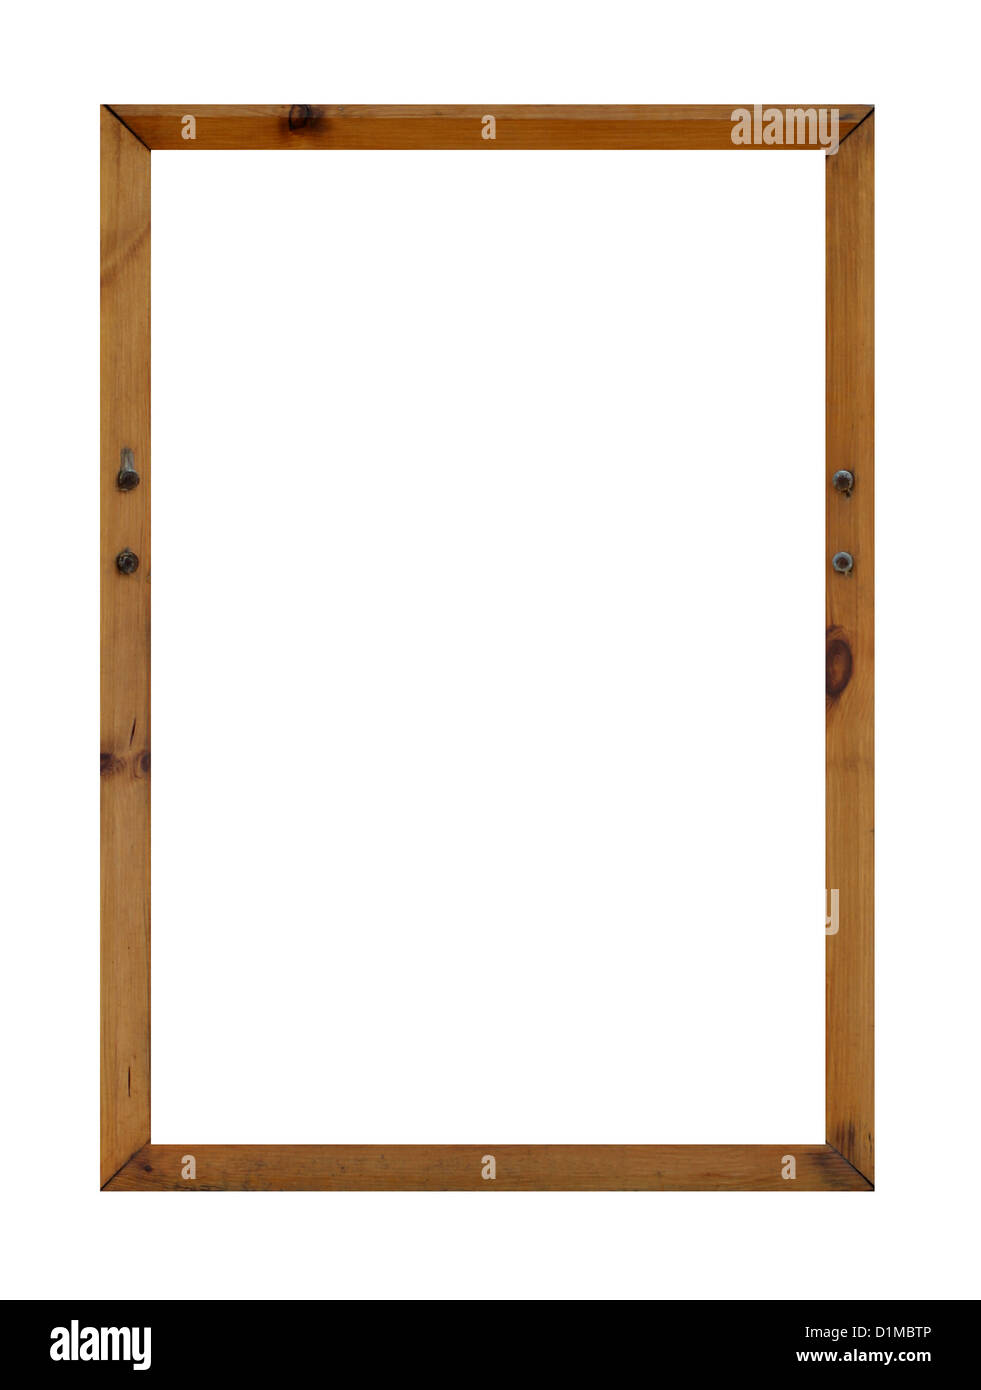 Blank wooden frame with copy space isolated on white background. Stock Photo